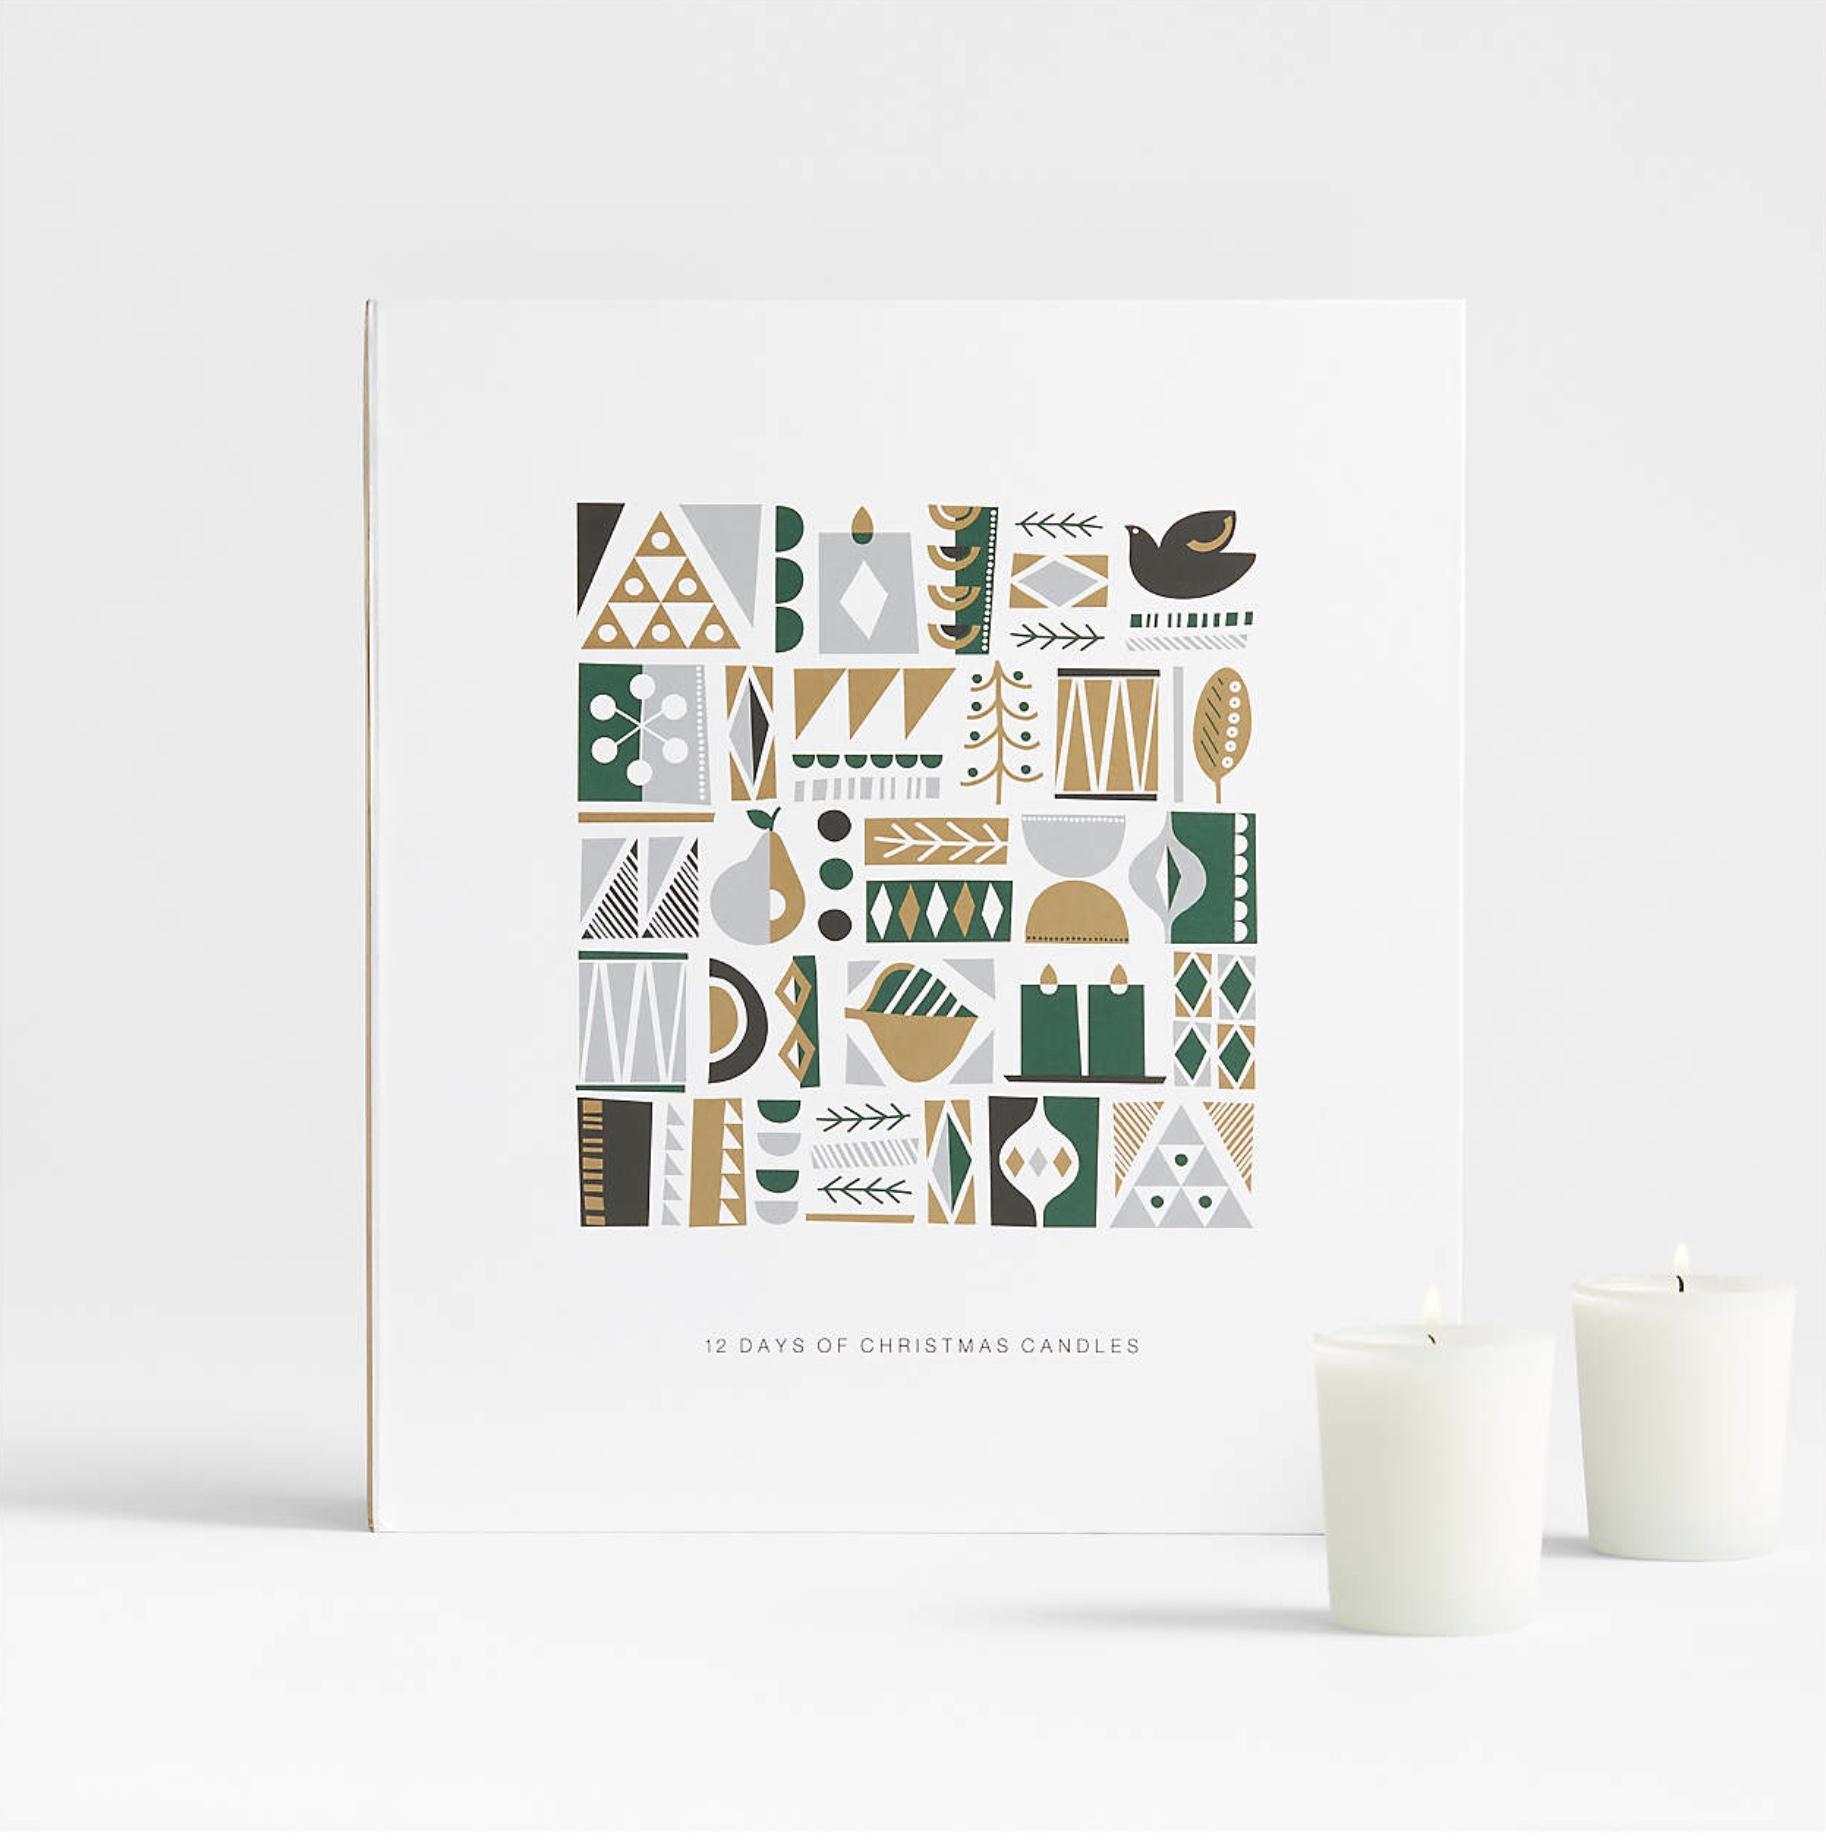 Crate and Barrel 12 Days of Christmas Candle Advent Calendar – Now Available